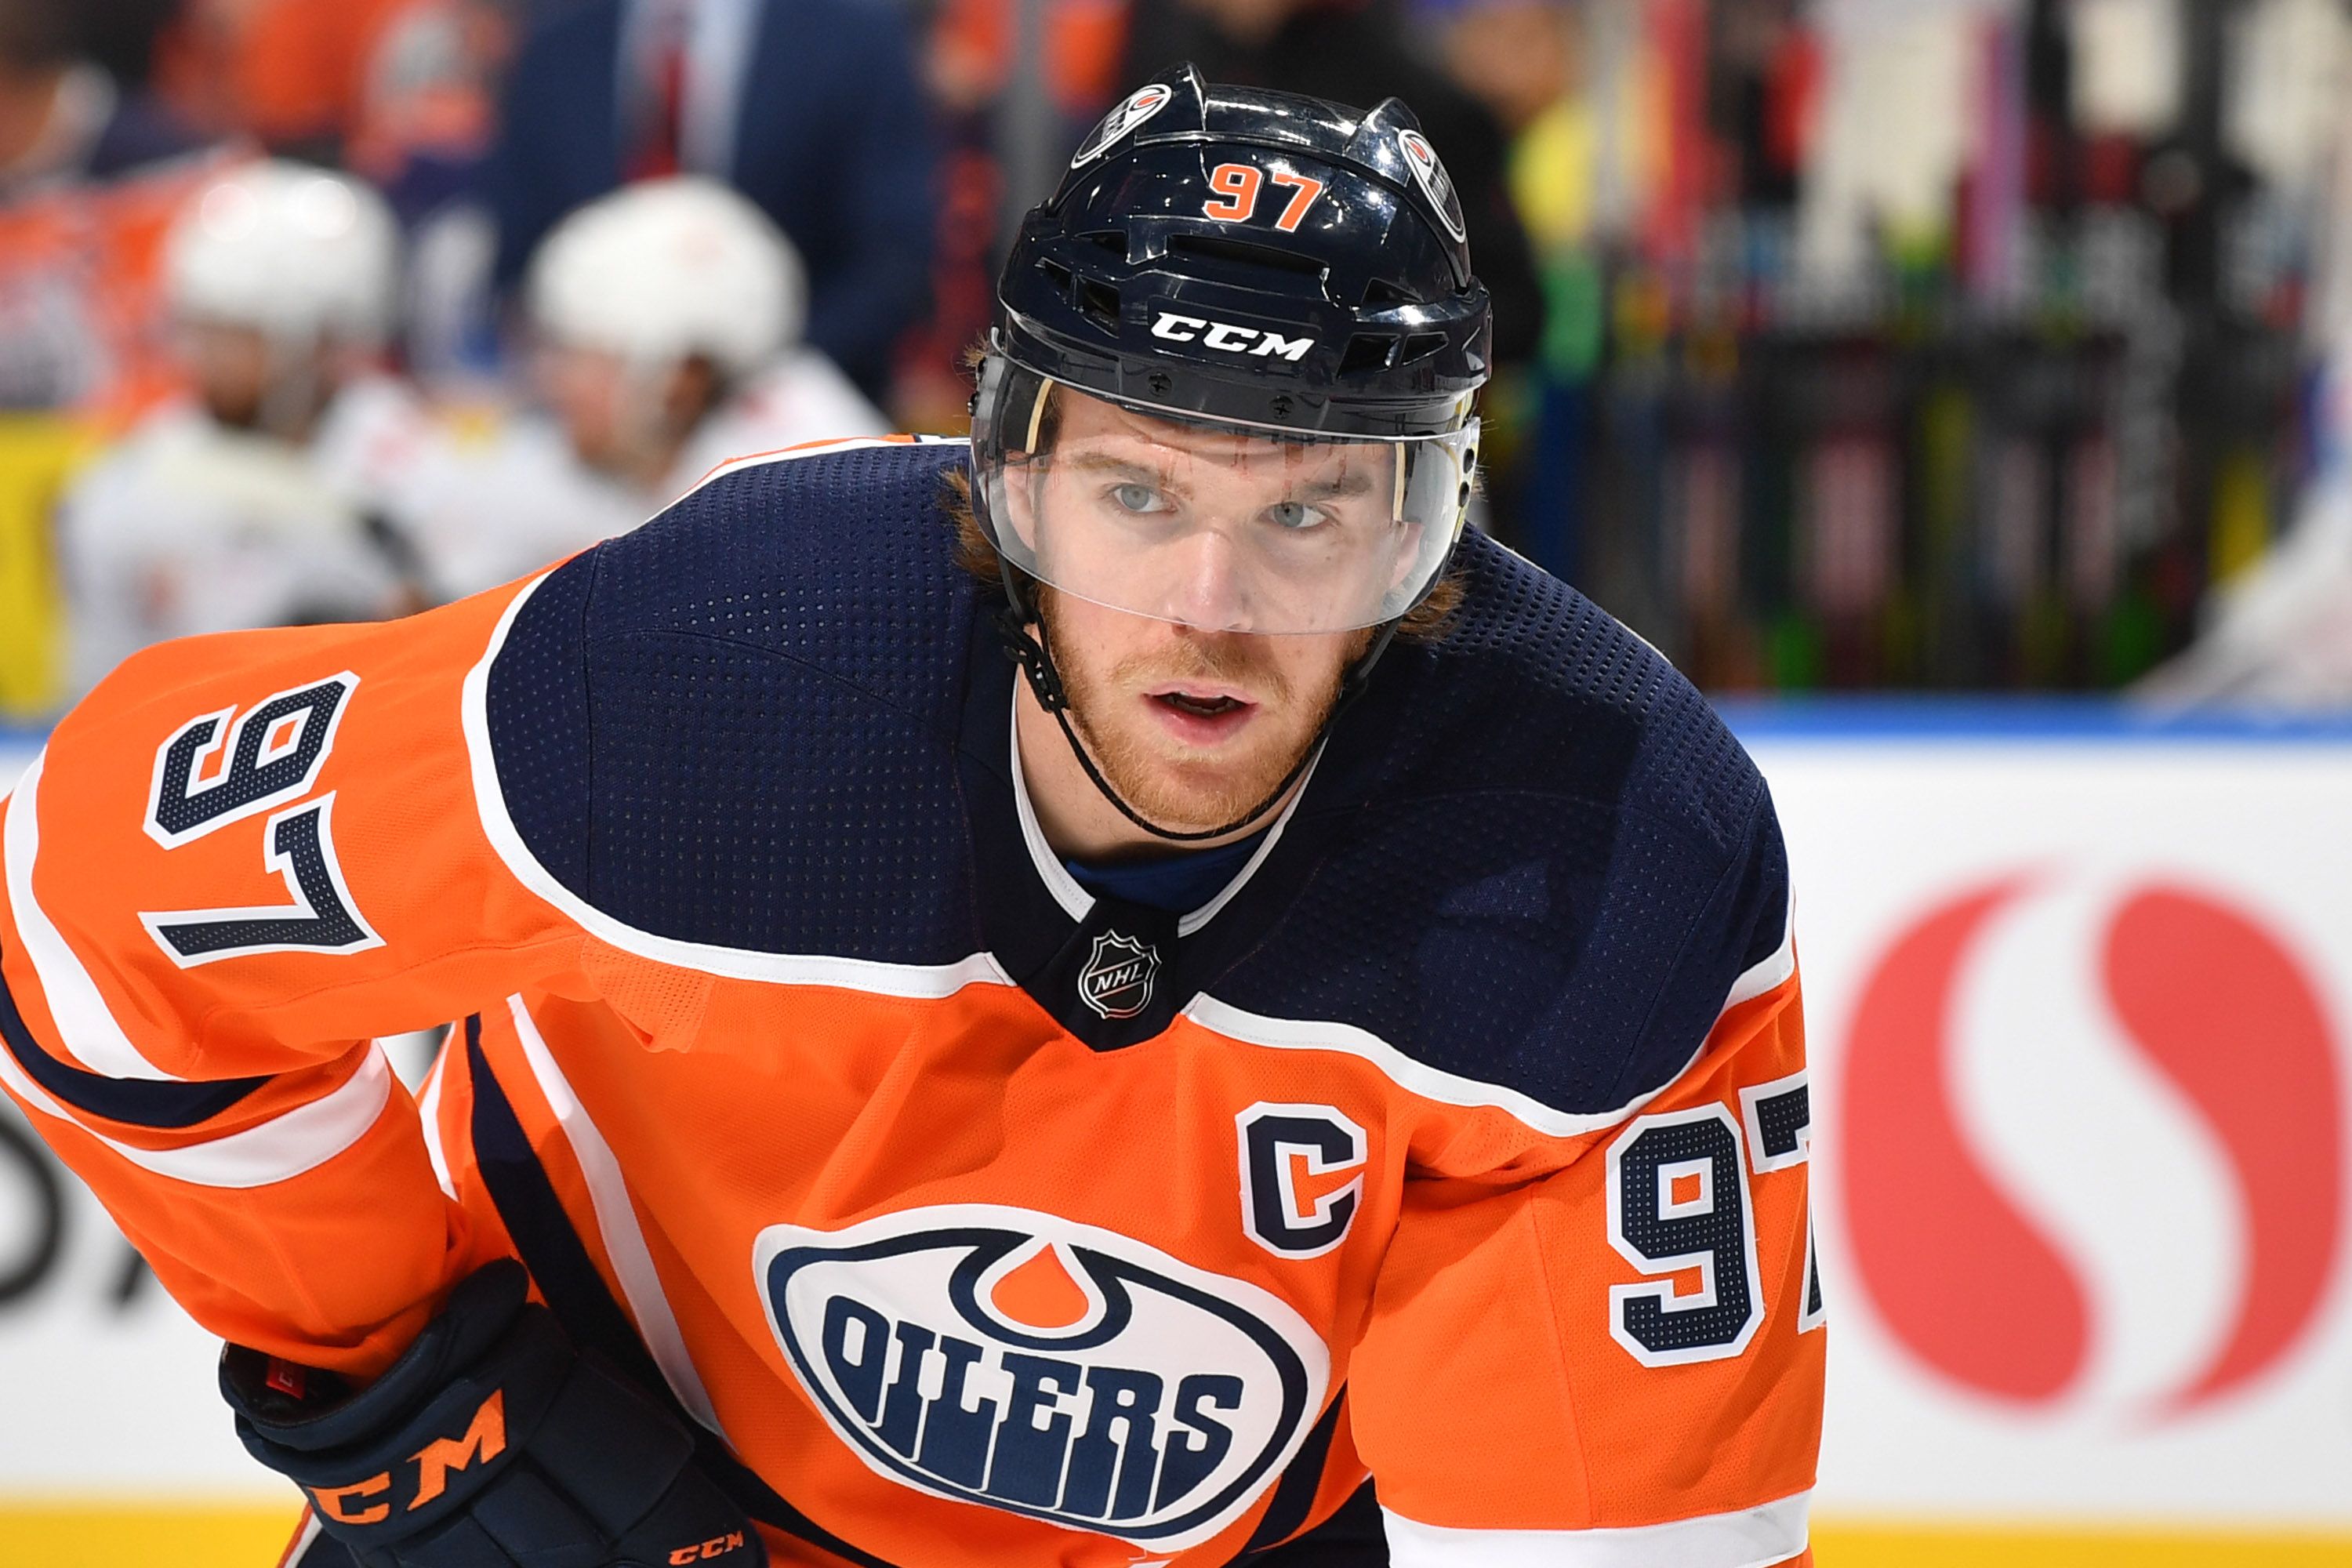 Connor McDavid of the Edmonton Oilers during a game against the Calgary Flames on January 29, 2020, at Rogers Place in Edmonton, Alberta, Canada | Photo: Andy Devlin/NHLI/Getty Images